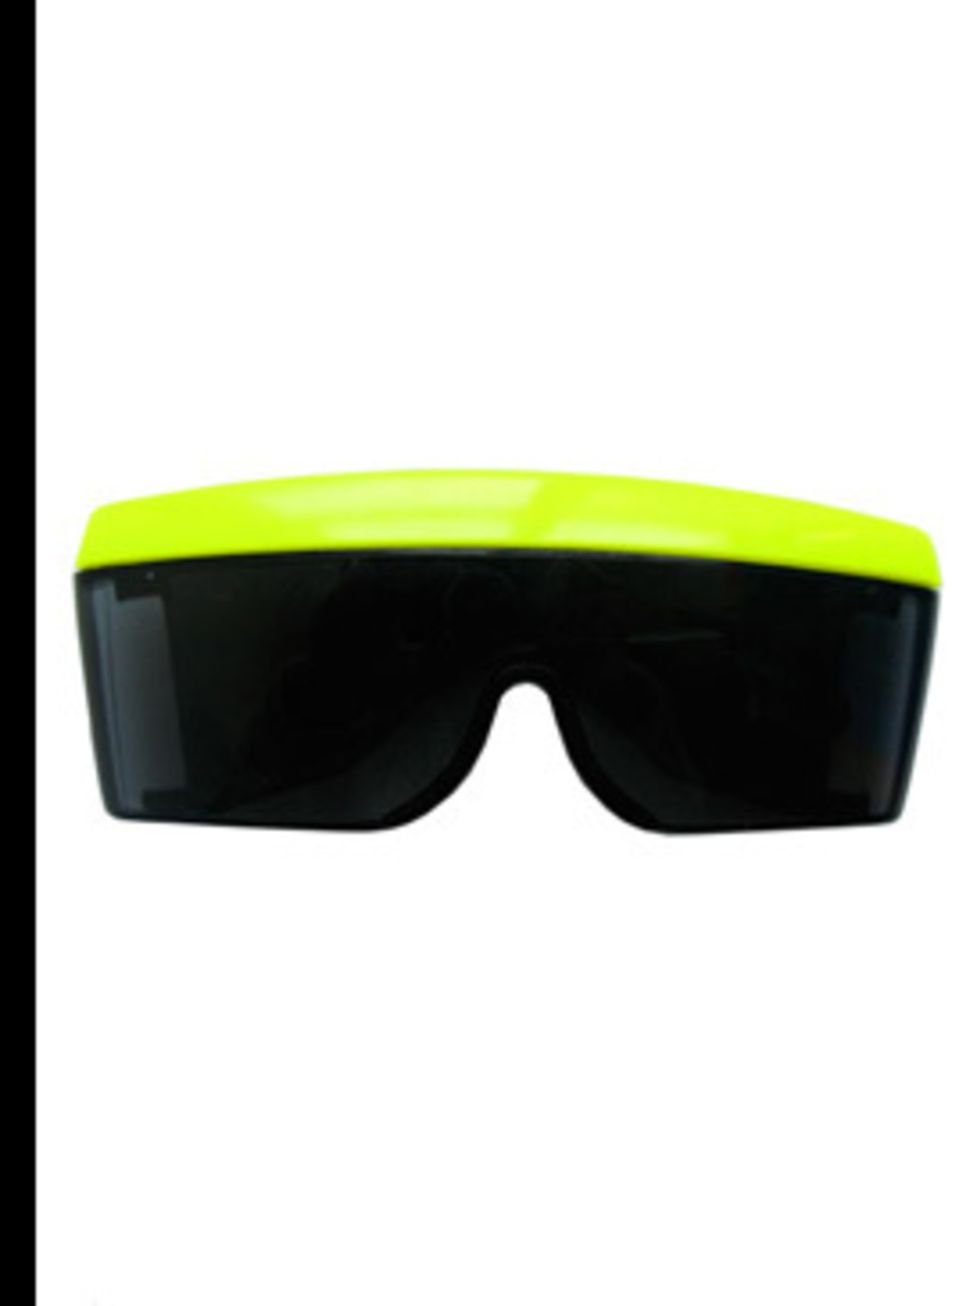 <p>Sunglasses, £25 by <a href="http://www.lazyoaf.co.uk/product_info.php?cPath=72_83&amp;products_id=1287">Lazy Oaf</a></p>